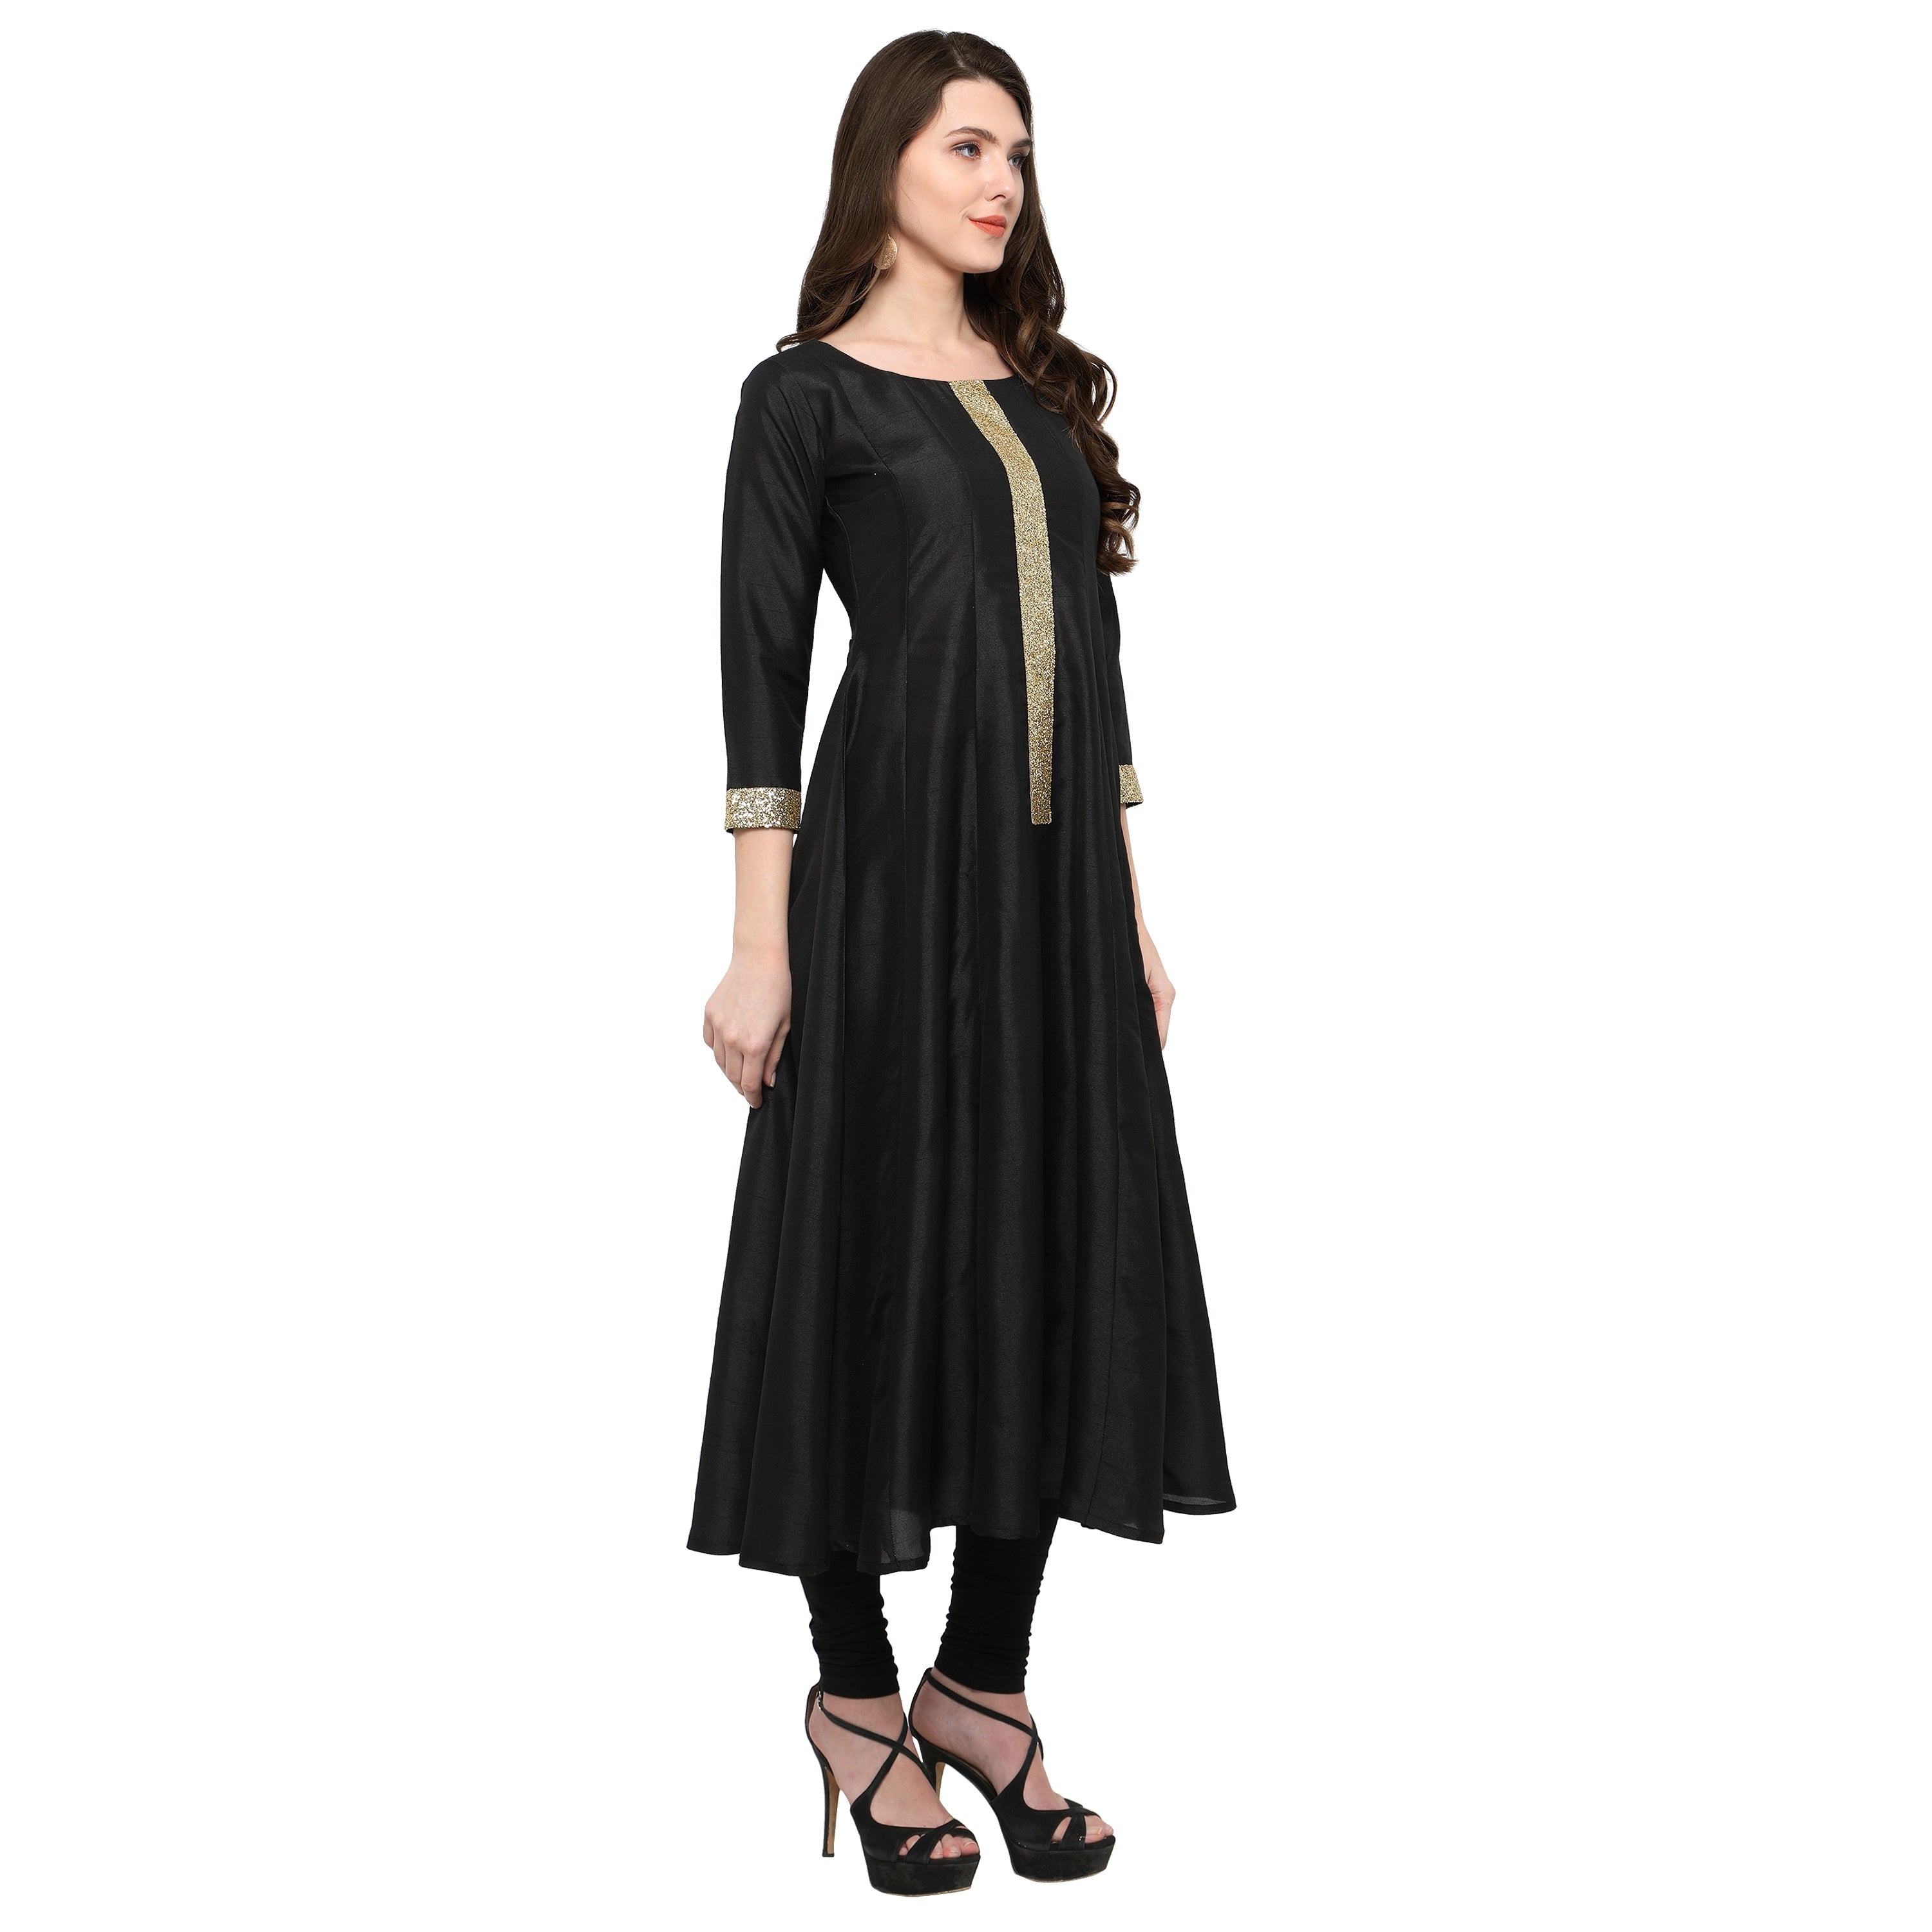 Women's Women's Black And Gold Anarkali Kurta Only For Festive And Party Wear - Ahalyaa